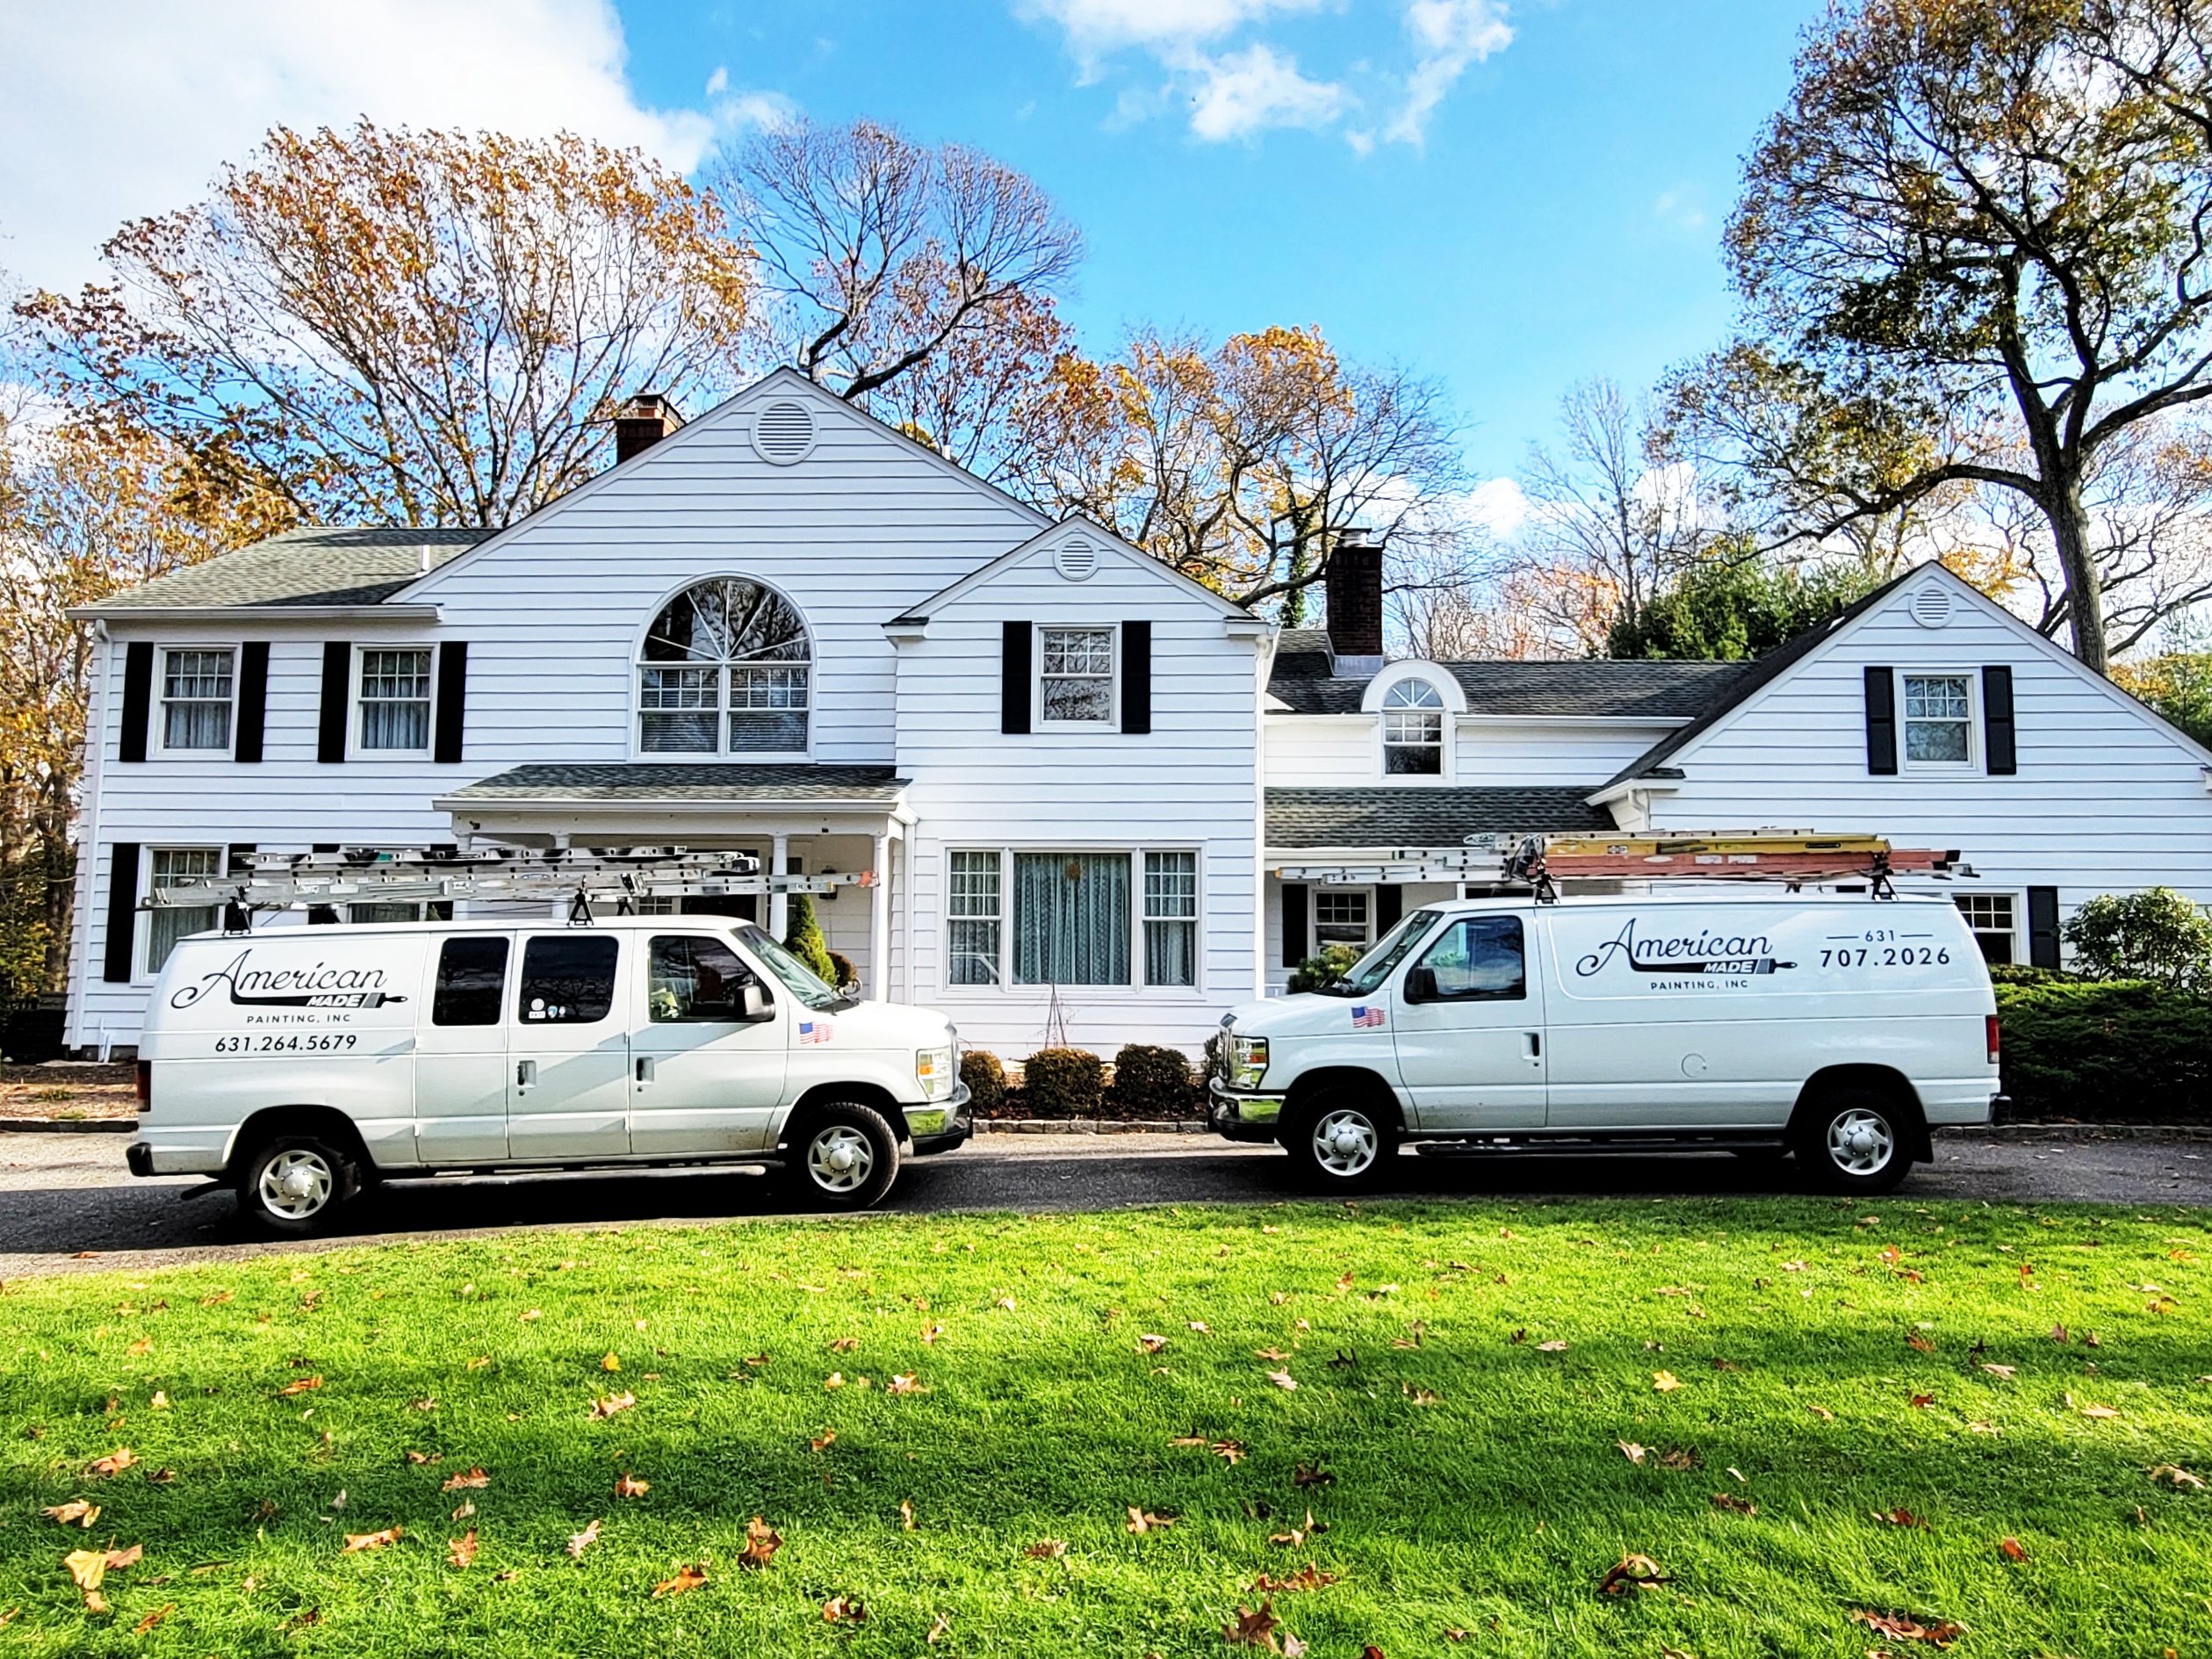 Two Long Island Painter vans out front of a Nissequogue, New York home.